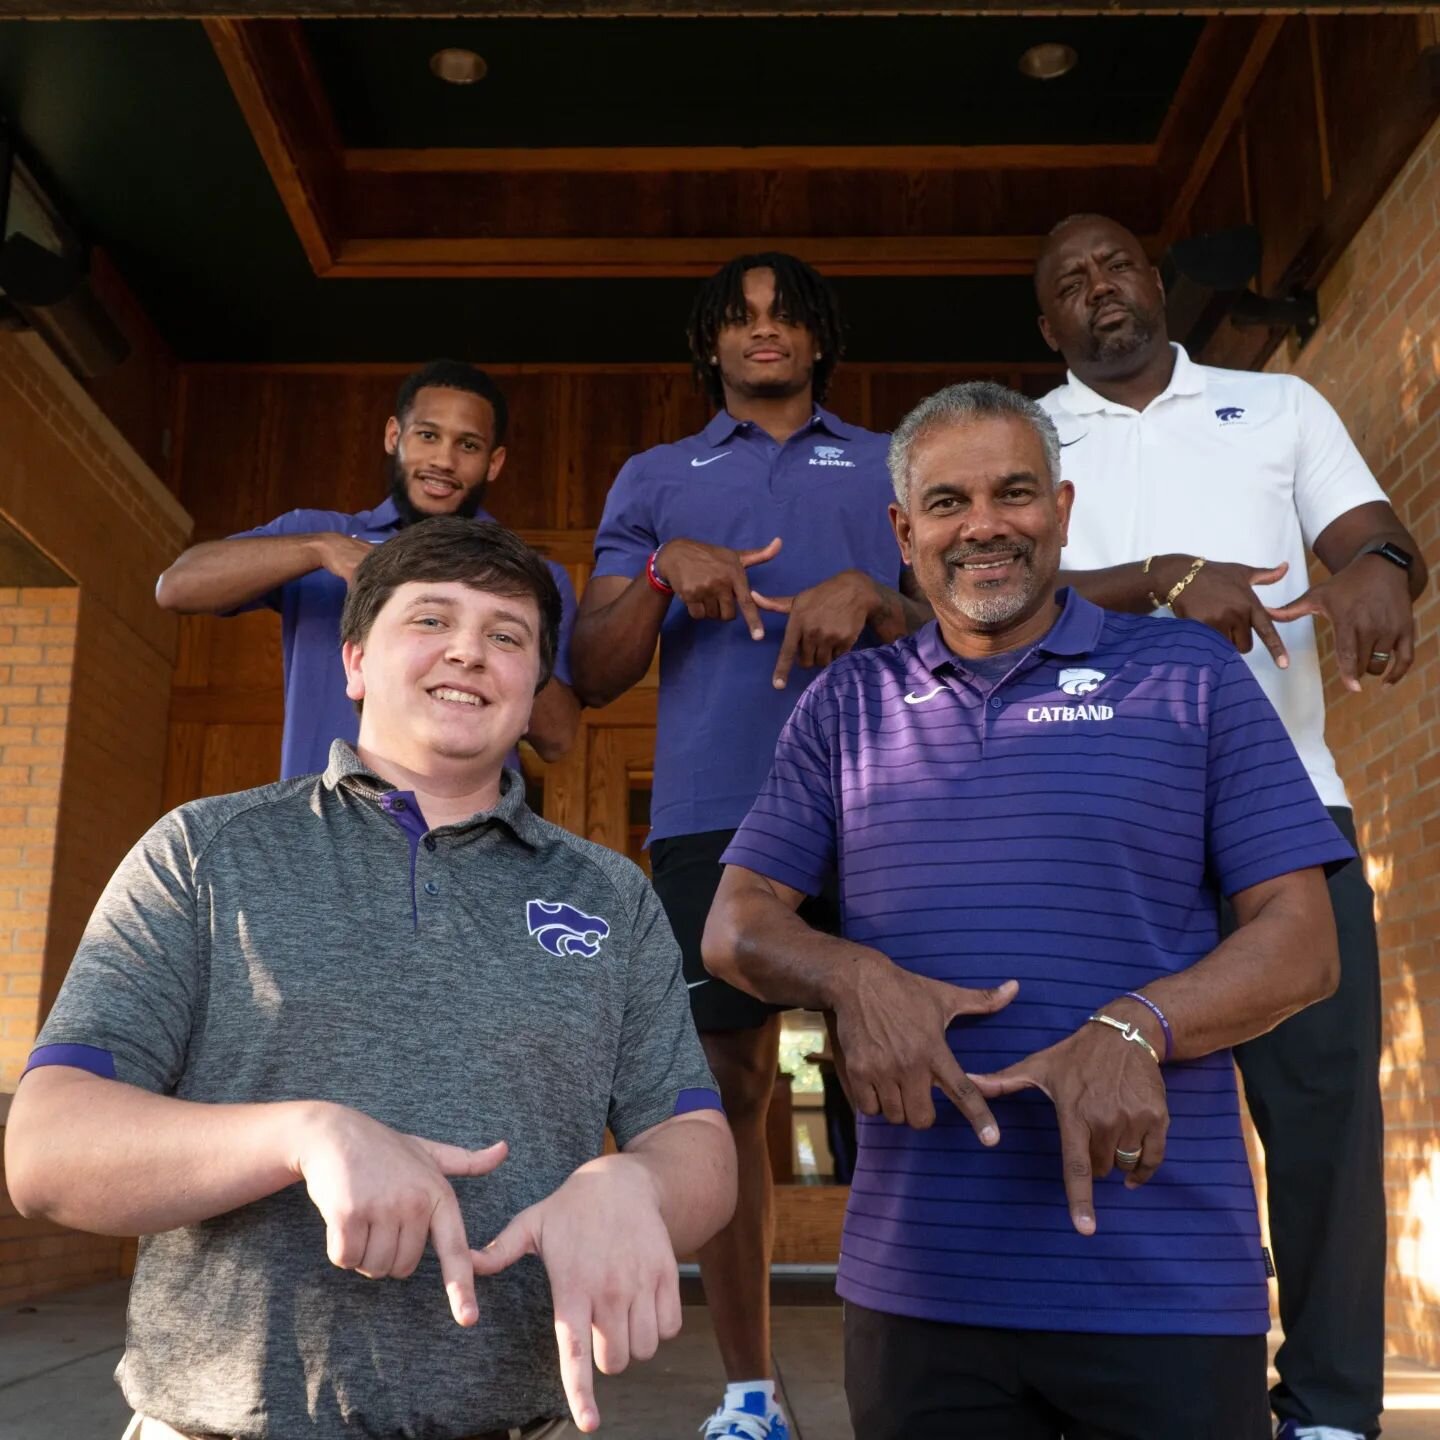 Tang time at FH!

A big thanks to the @kstatembb team for coming to dinner last night.
-
-
-
#psmoes #excelsior22